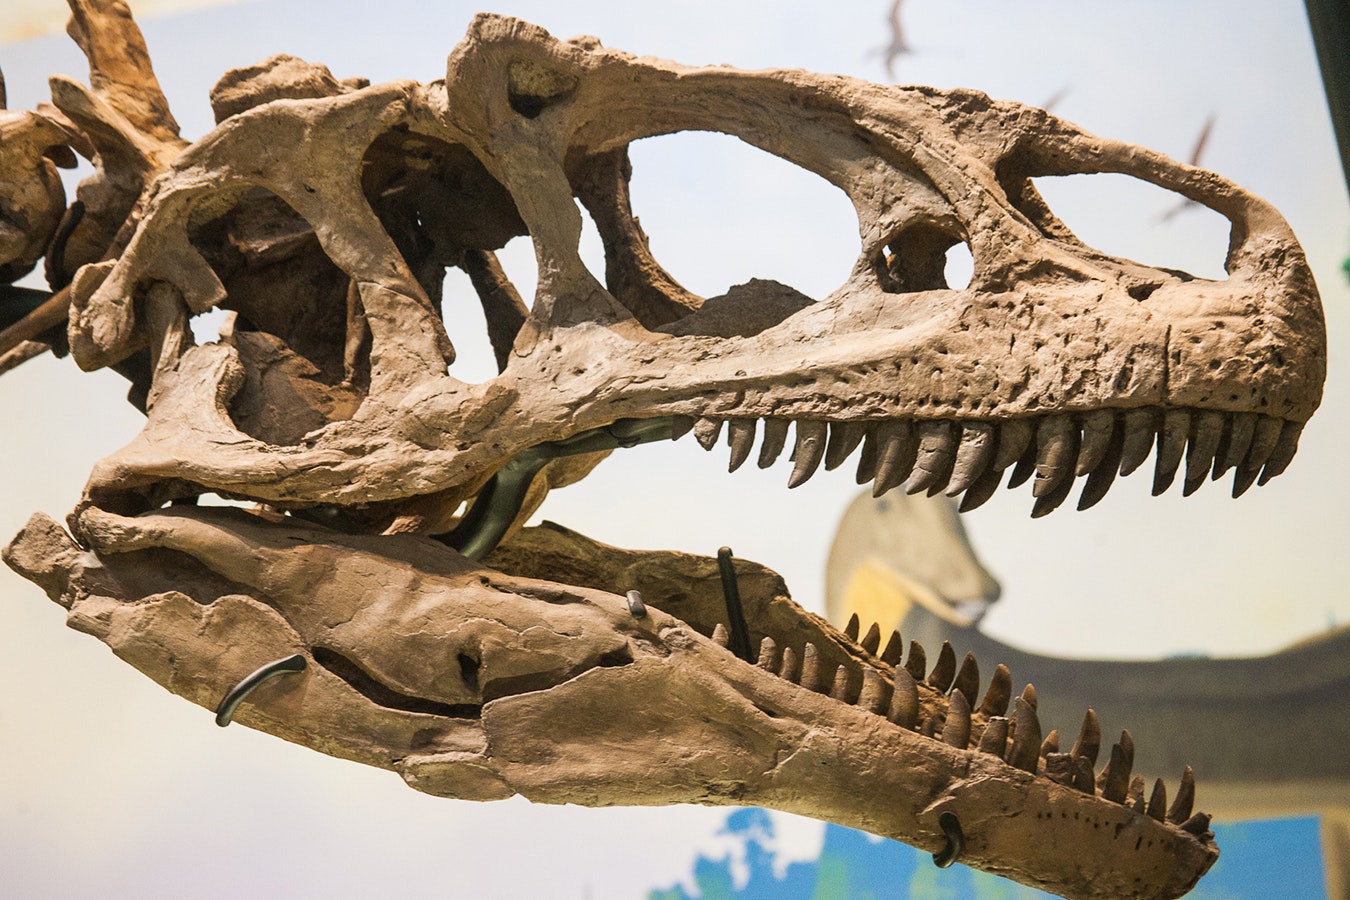 The bite marks of carnivorous Wyoming dinosaurs, like the Allosaurus, are telling scientists a lot about how they lived and died millions of years ago.